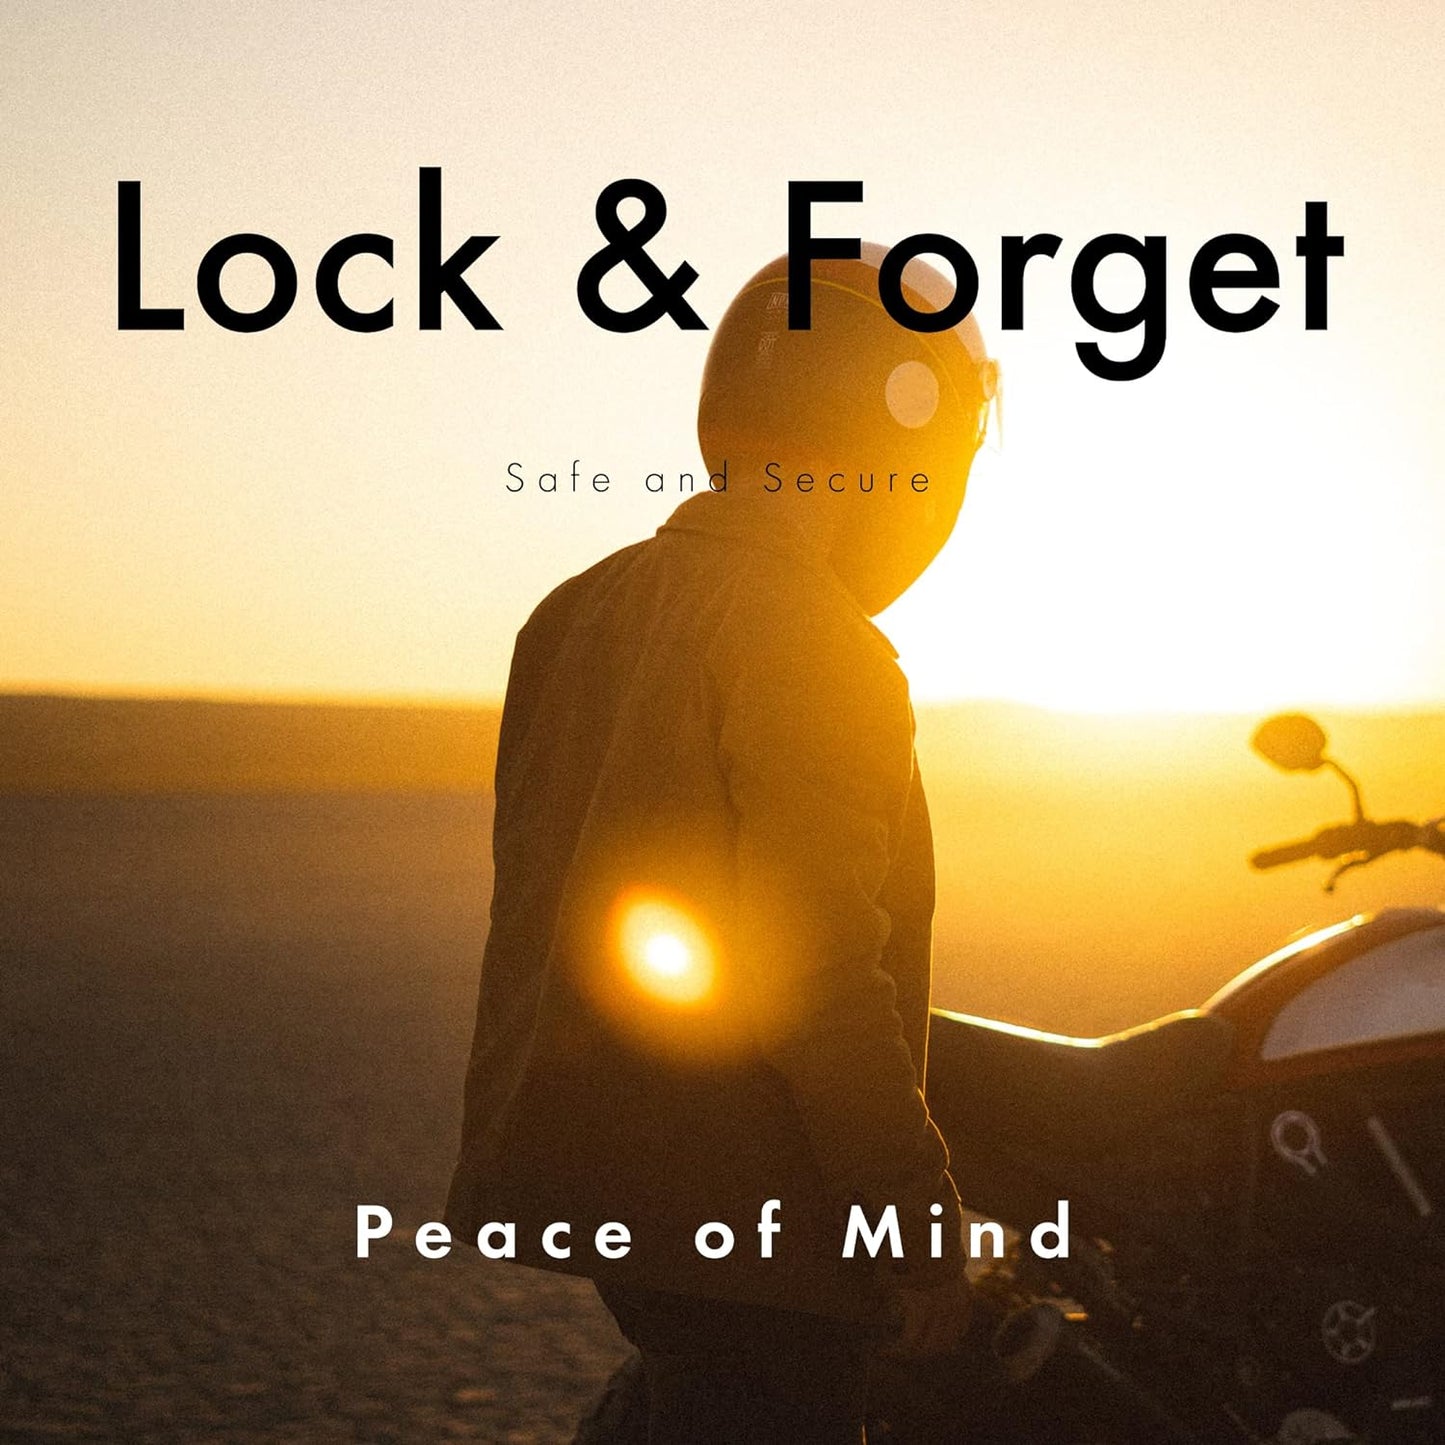 Promotional image for 'Lock & Forget' featuring a motorcyclist at sunset with the words 'Safe and Secure' and 'Peace of Mind' overlaid on the image